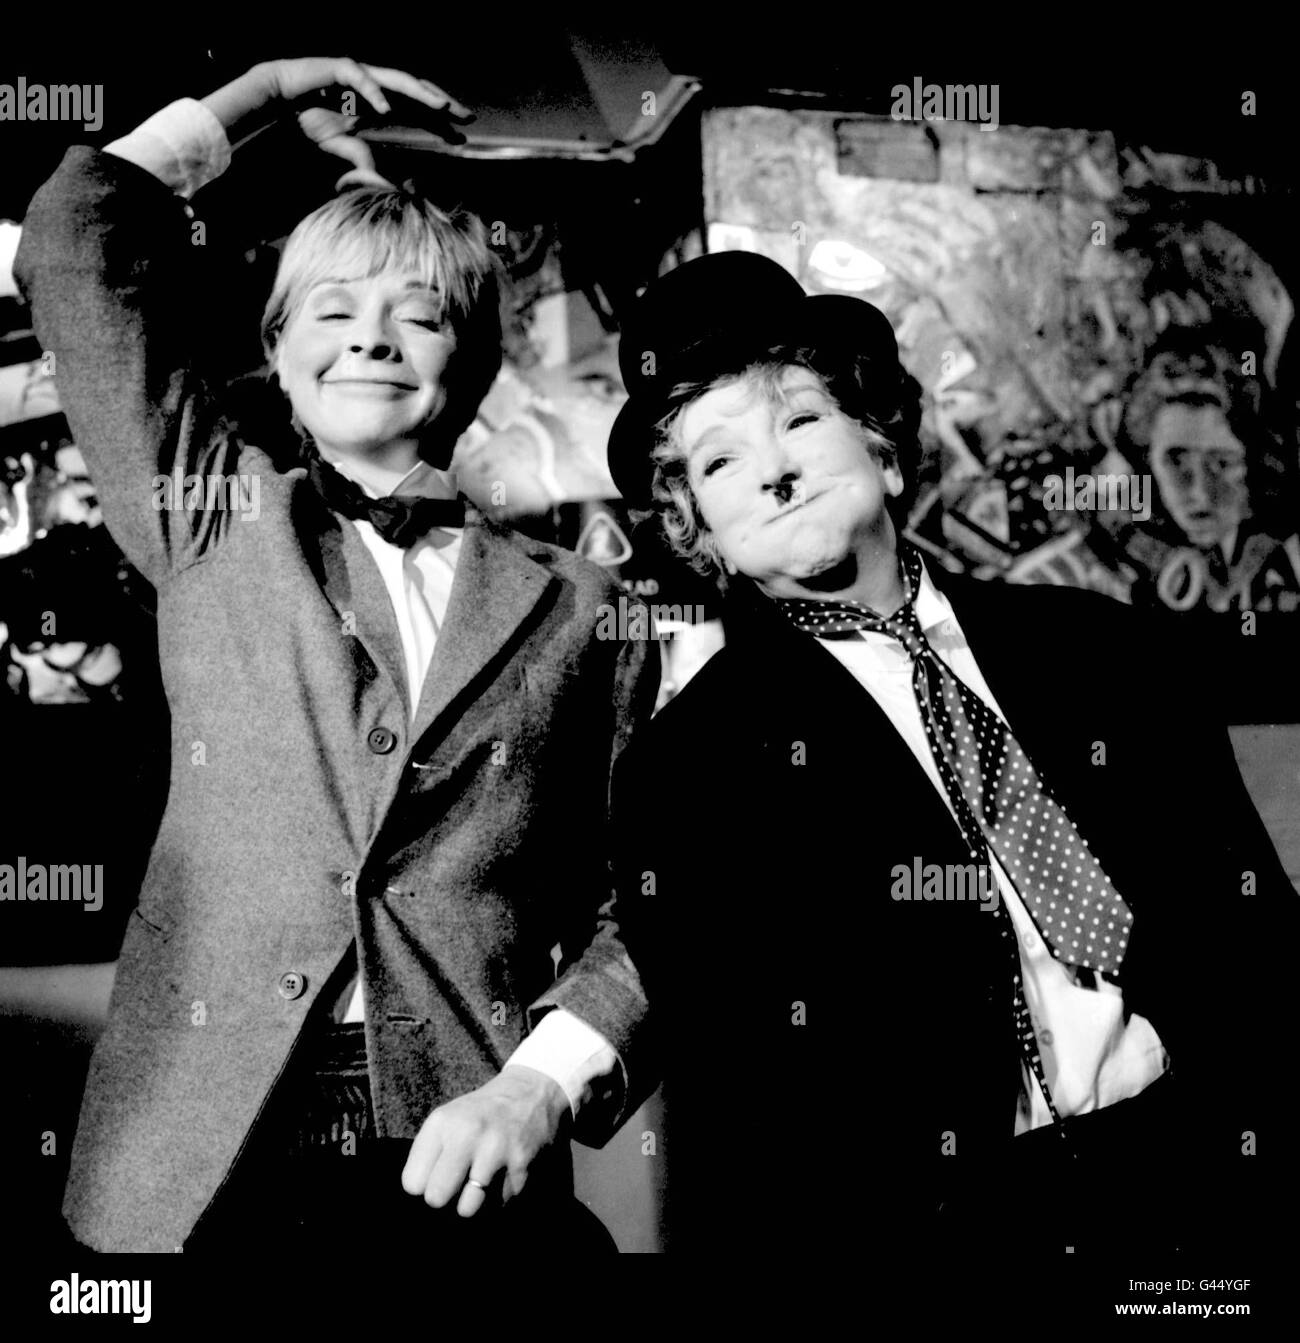 The female Laurel and Hardy are British actresses Susannah York (left) and Beryl Reid. They ar doing a take-off of the old-time comics for a fancy dress scene in the film version of Frank Marcus's play "The Killing of Sister George". Stock Photo